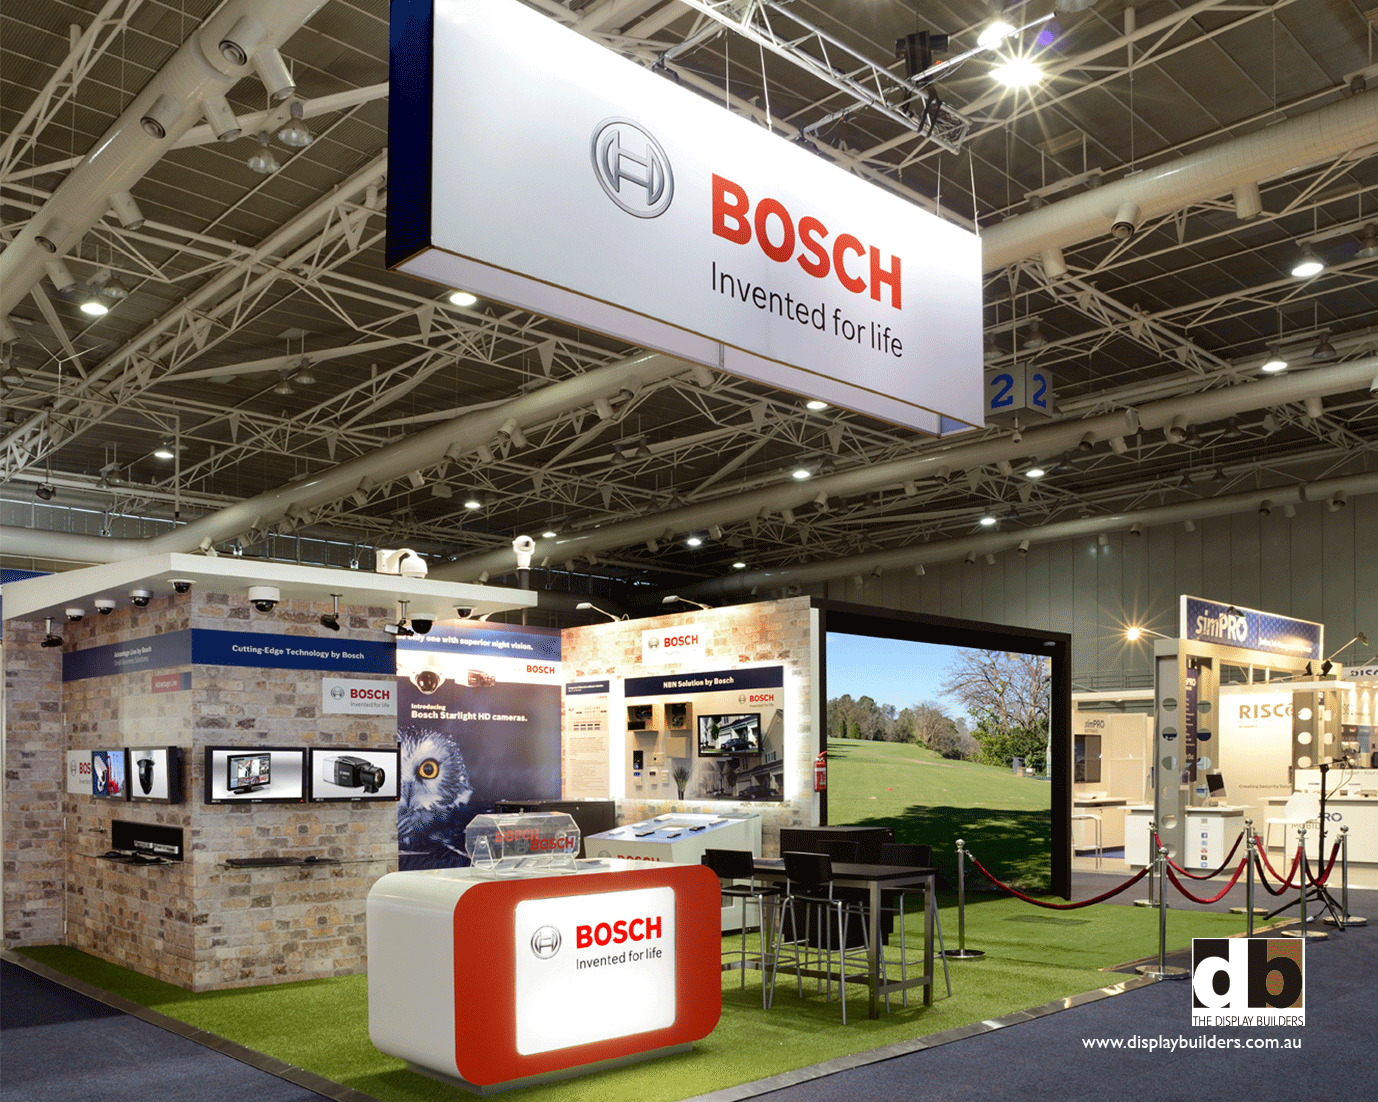 the bosch stand security 2013featured an interactive golf game to medium